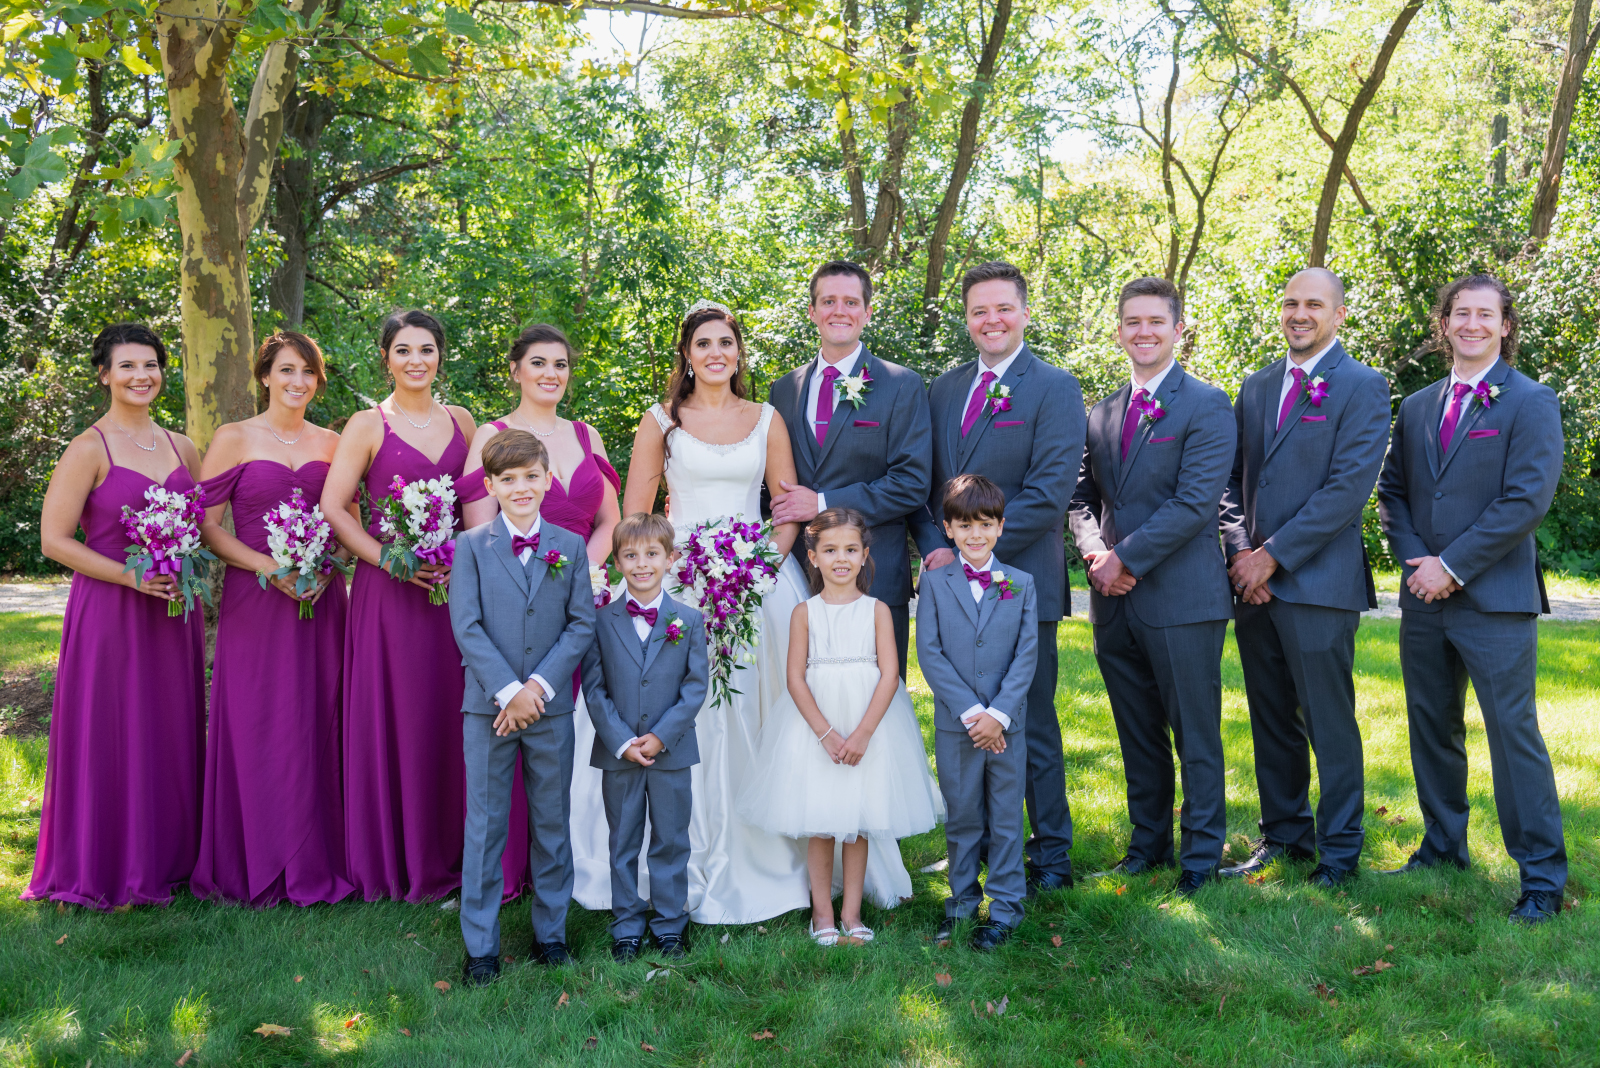 Bride and groom with bridal party, bridal party portrait, green, trees, nature, sweet wedding ceremony at Crocker Park, Westlake OH